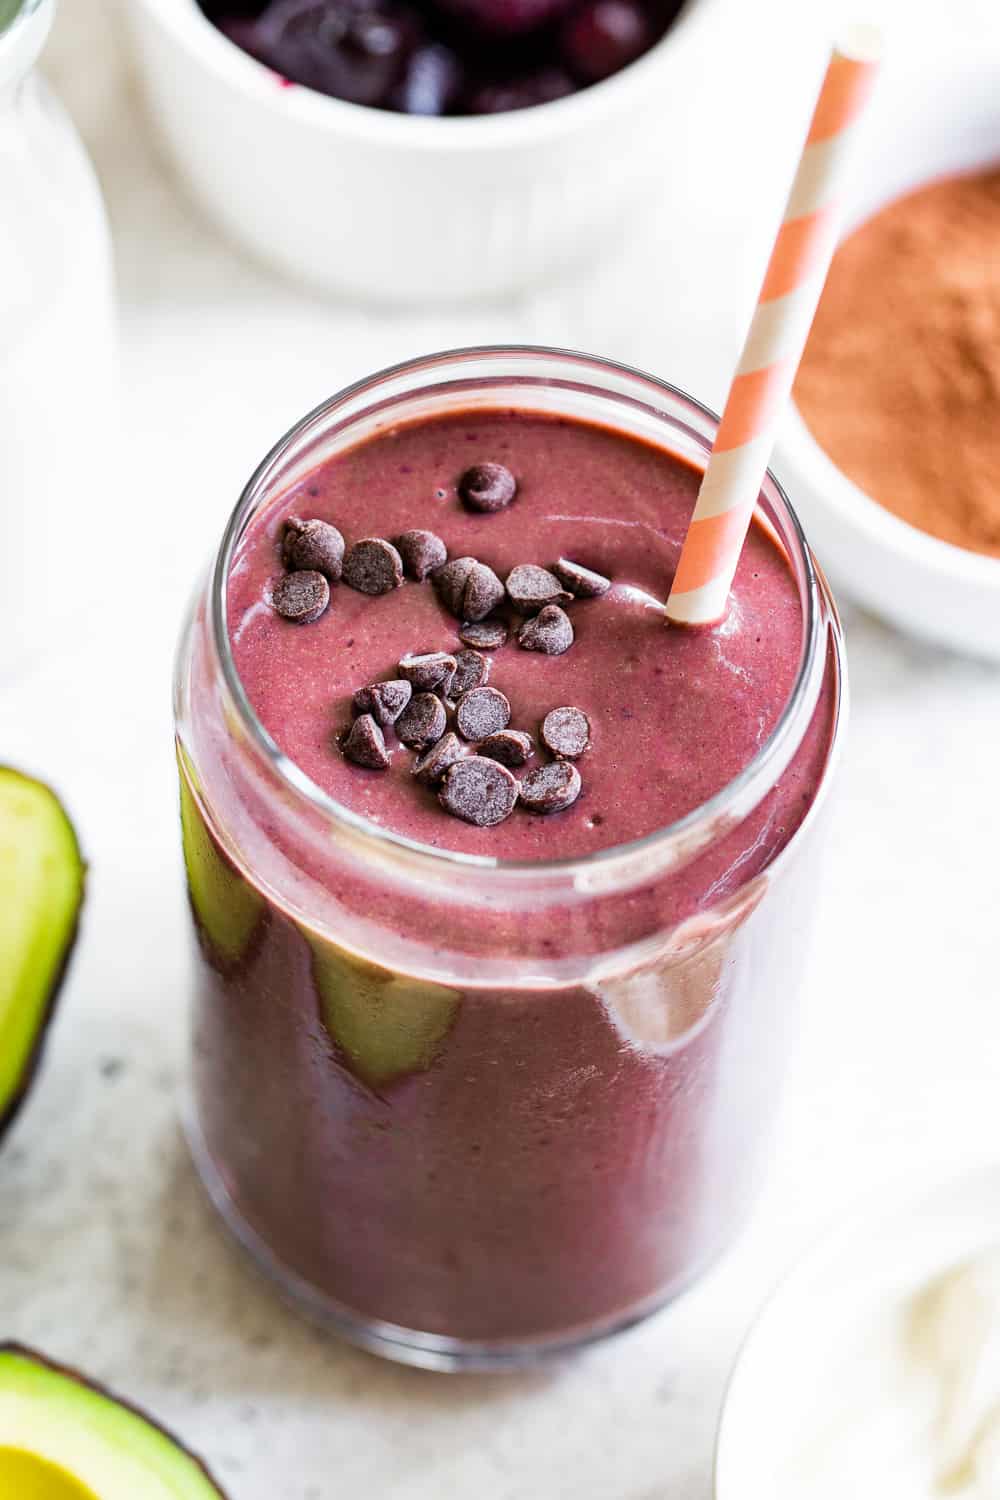 This simple paleo smoothie has become such a favorite that I make it every morning! Just the right amount of sweetness, with healthy fats, carbs, creamy texture and added protein. Enjoy it daily for breakfast or as an afternoon pick me up or even a dessert! #paleo #vegan #smoothie #cleaneating 